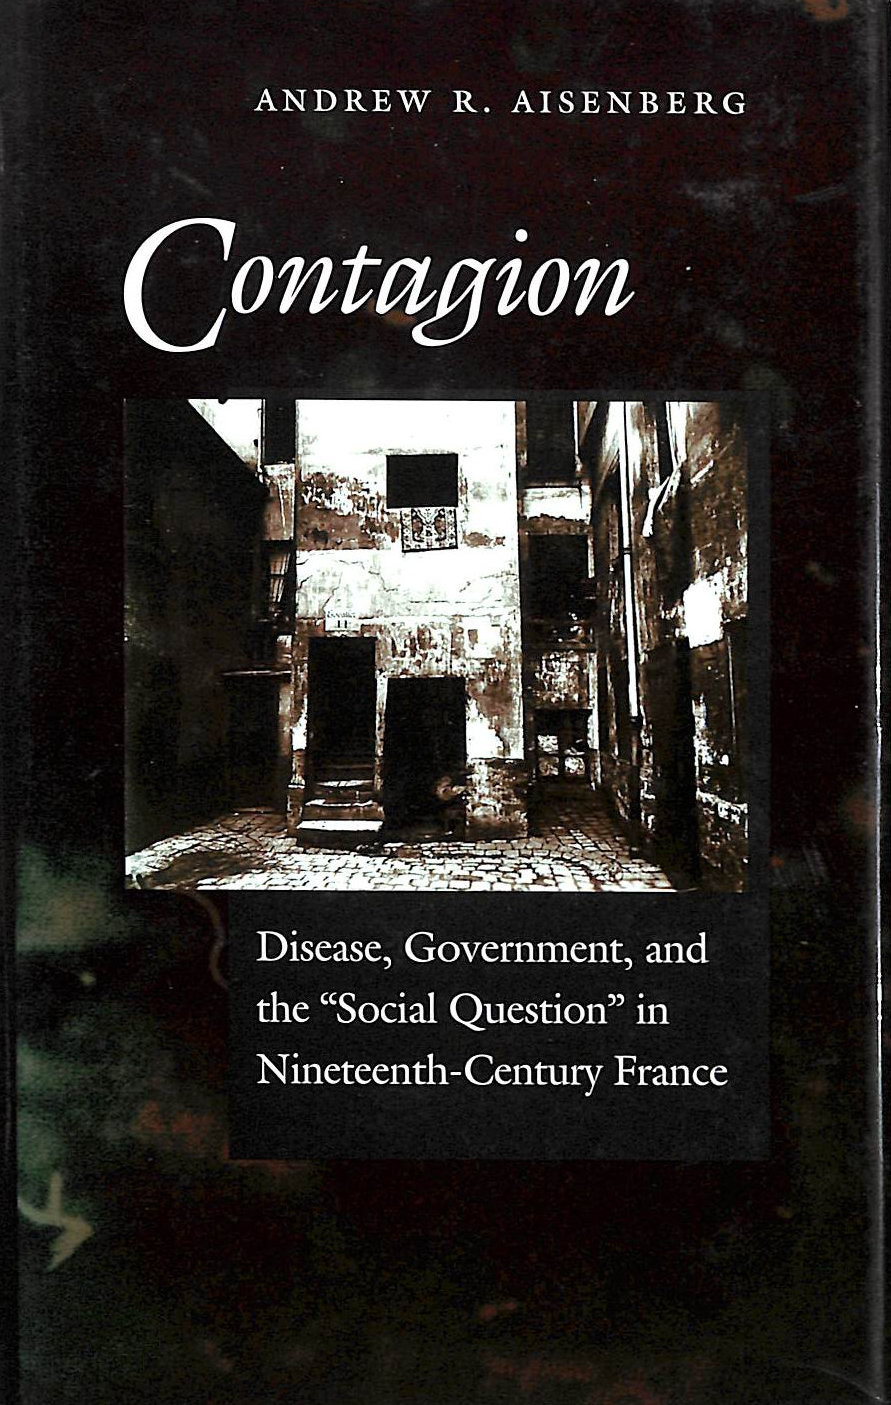 AISENBERG, ANDREW R. - Contagion: Disease, Government and the Social Question in Nineteenth-century France